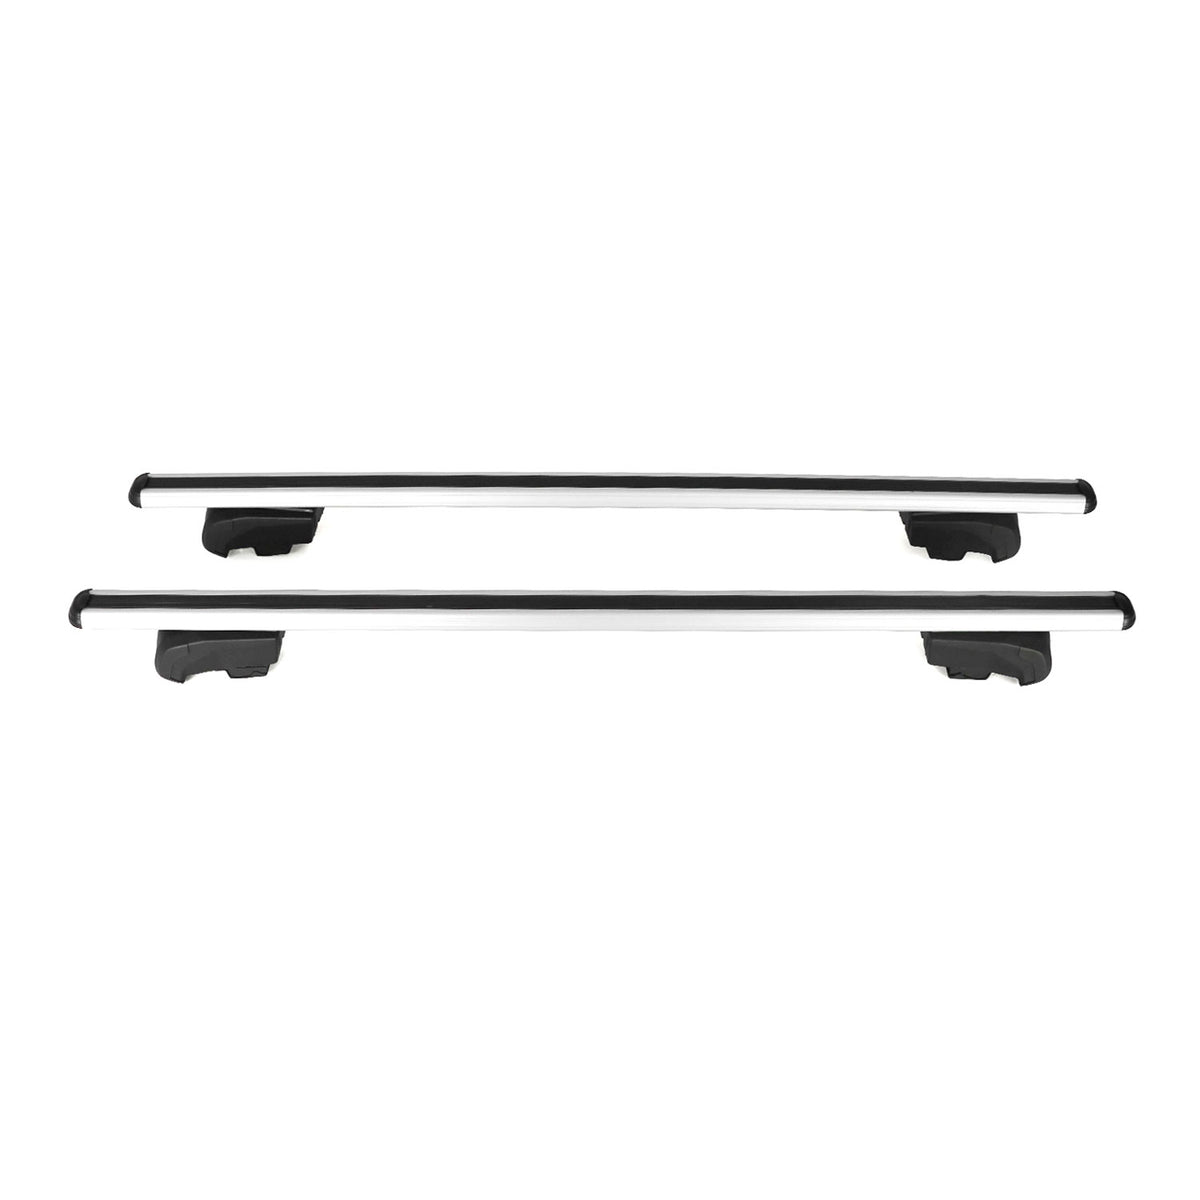 Roof rack luggage rack for Fiat Tipo Estate 2015-2020 TÜV ABE aluminum gray 2x